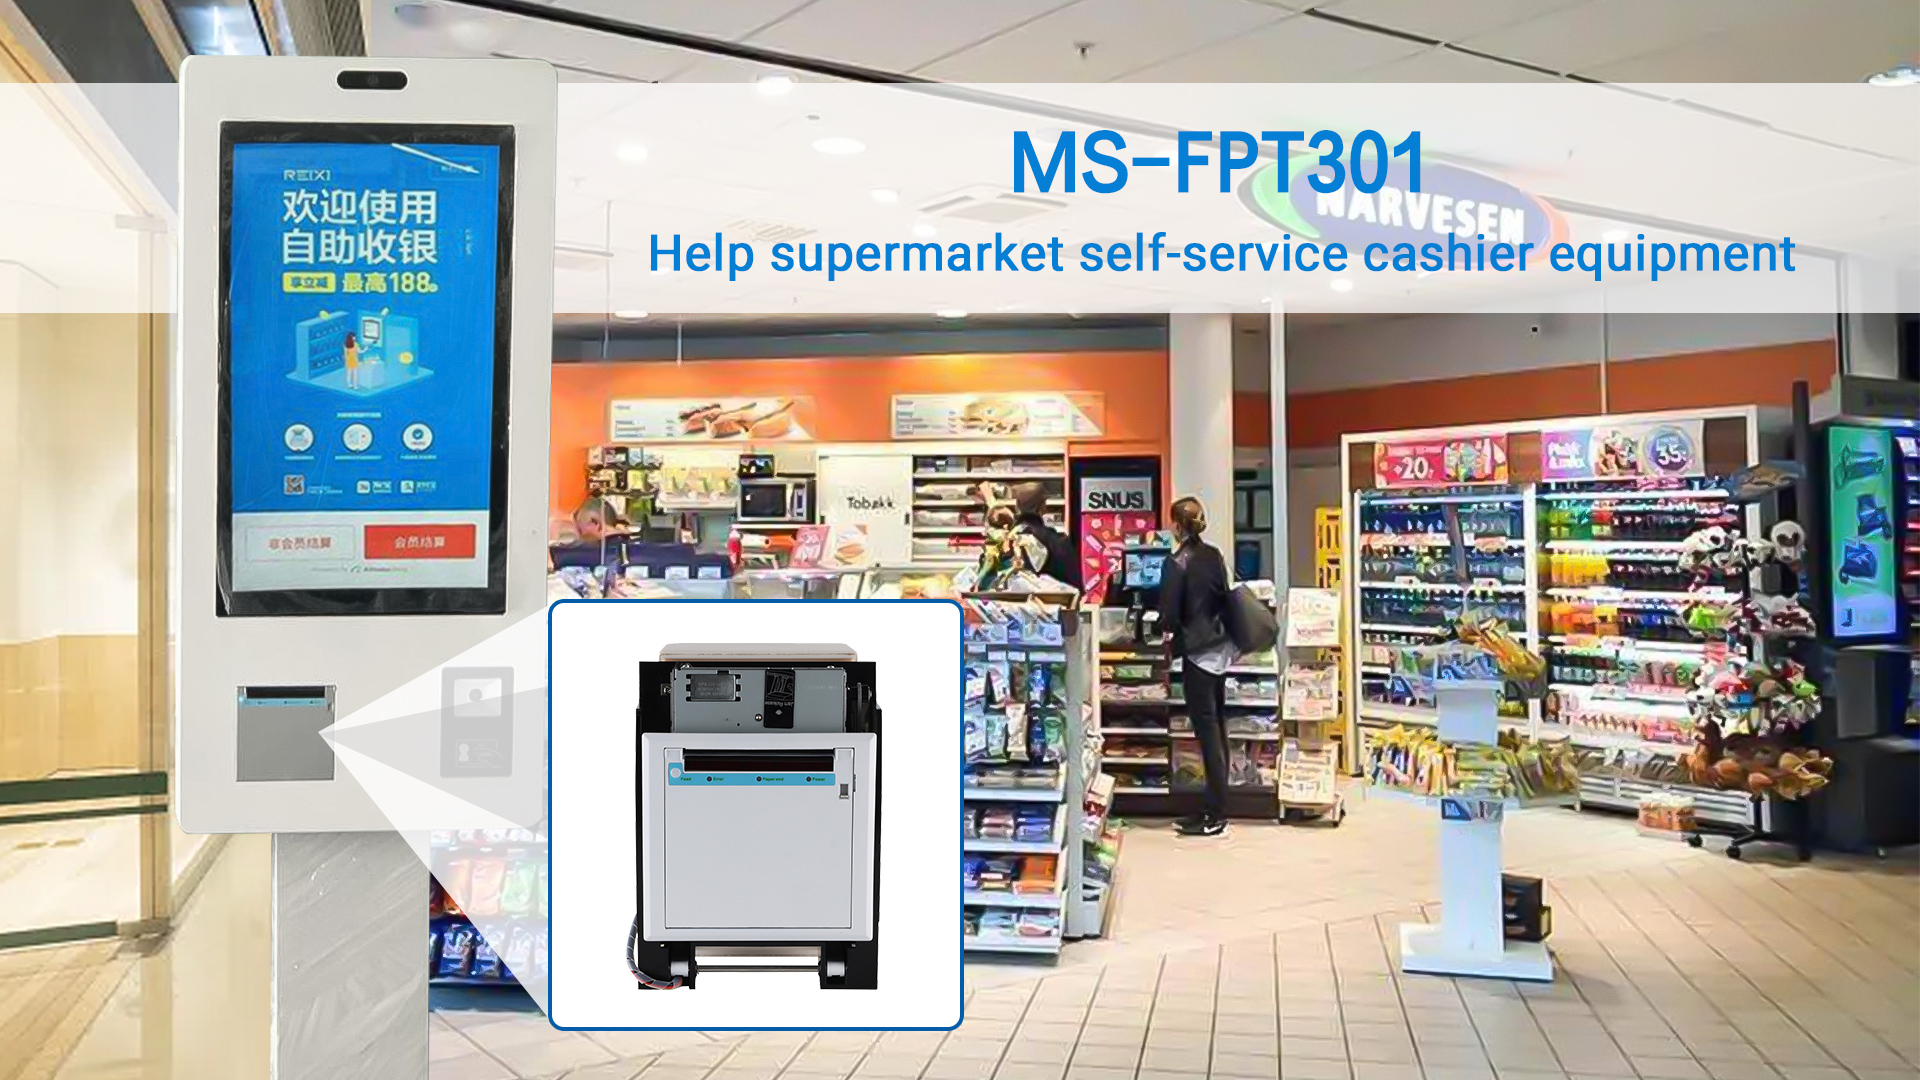 Masung printer MS-FPT301 provides a solution for self-service cash register equipment in supermarkets